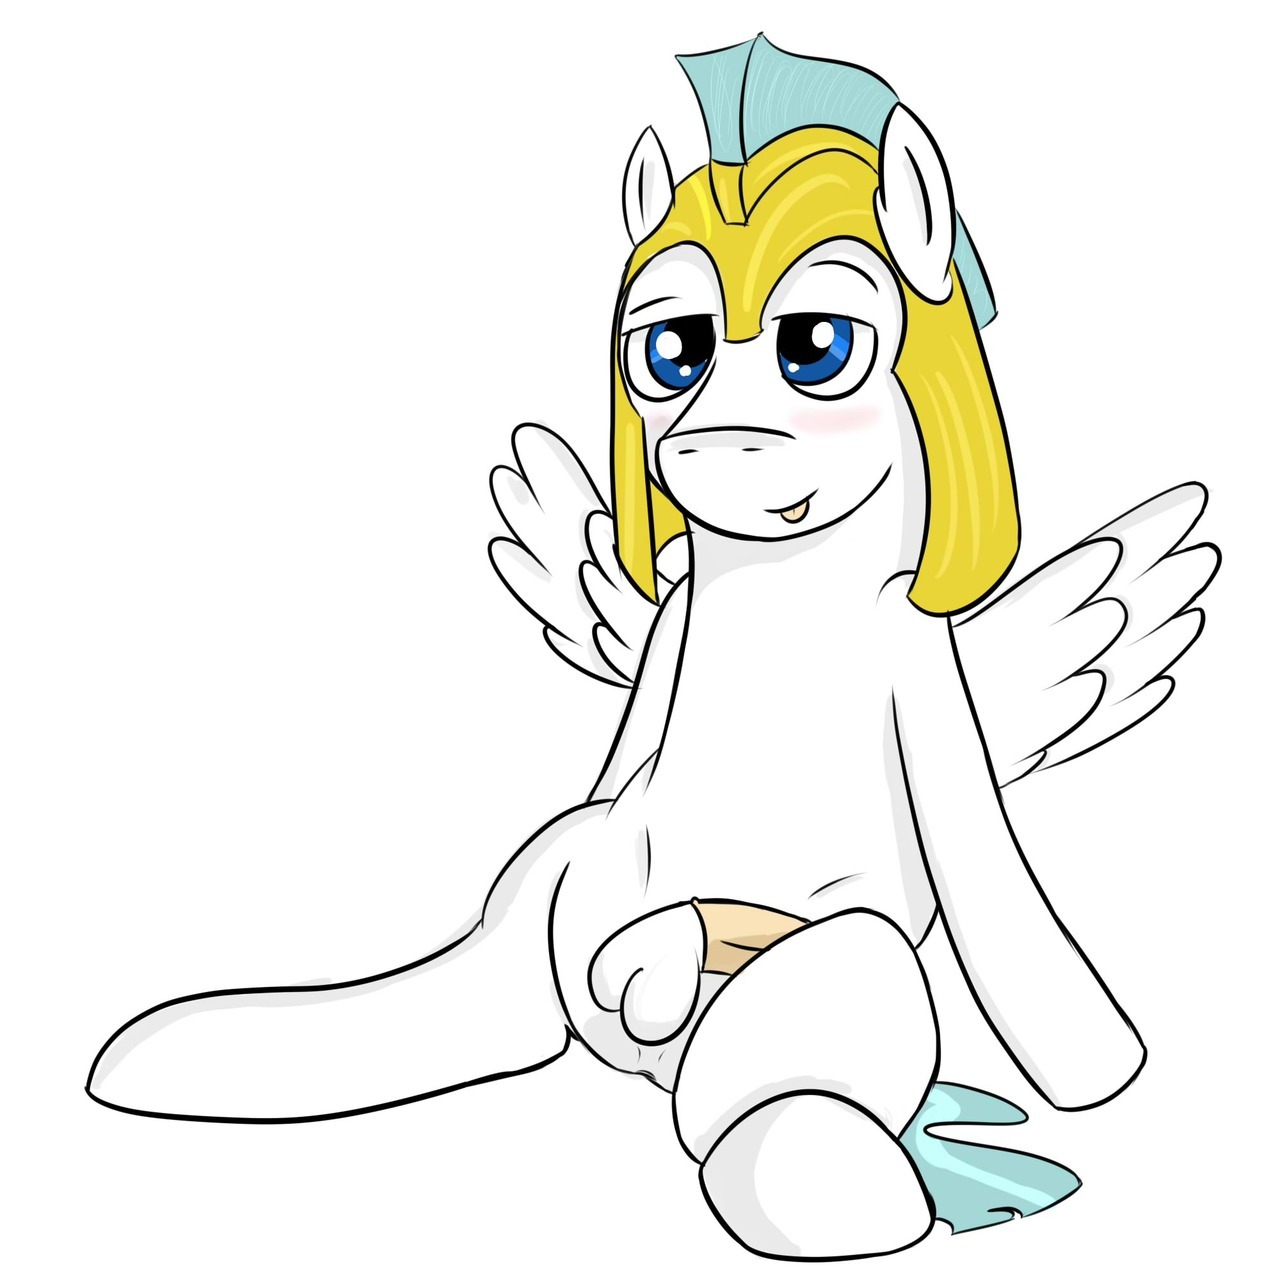 Cute Guard Pony NSFW warning.  Trying a different style of line inking by bumping